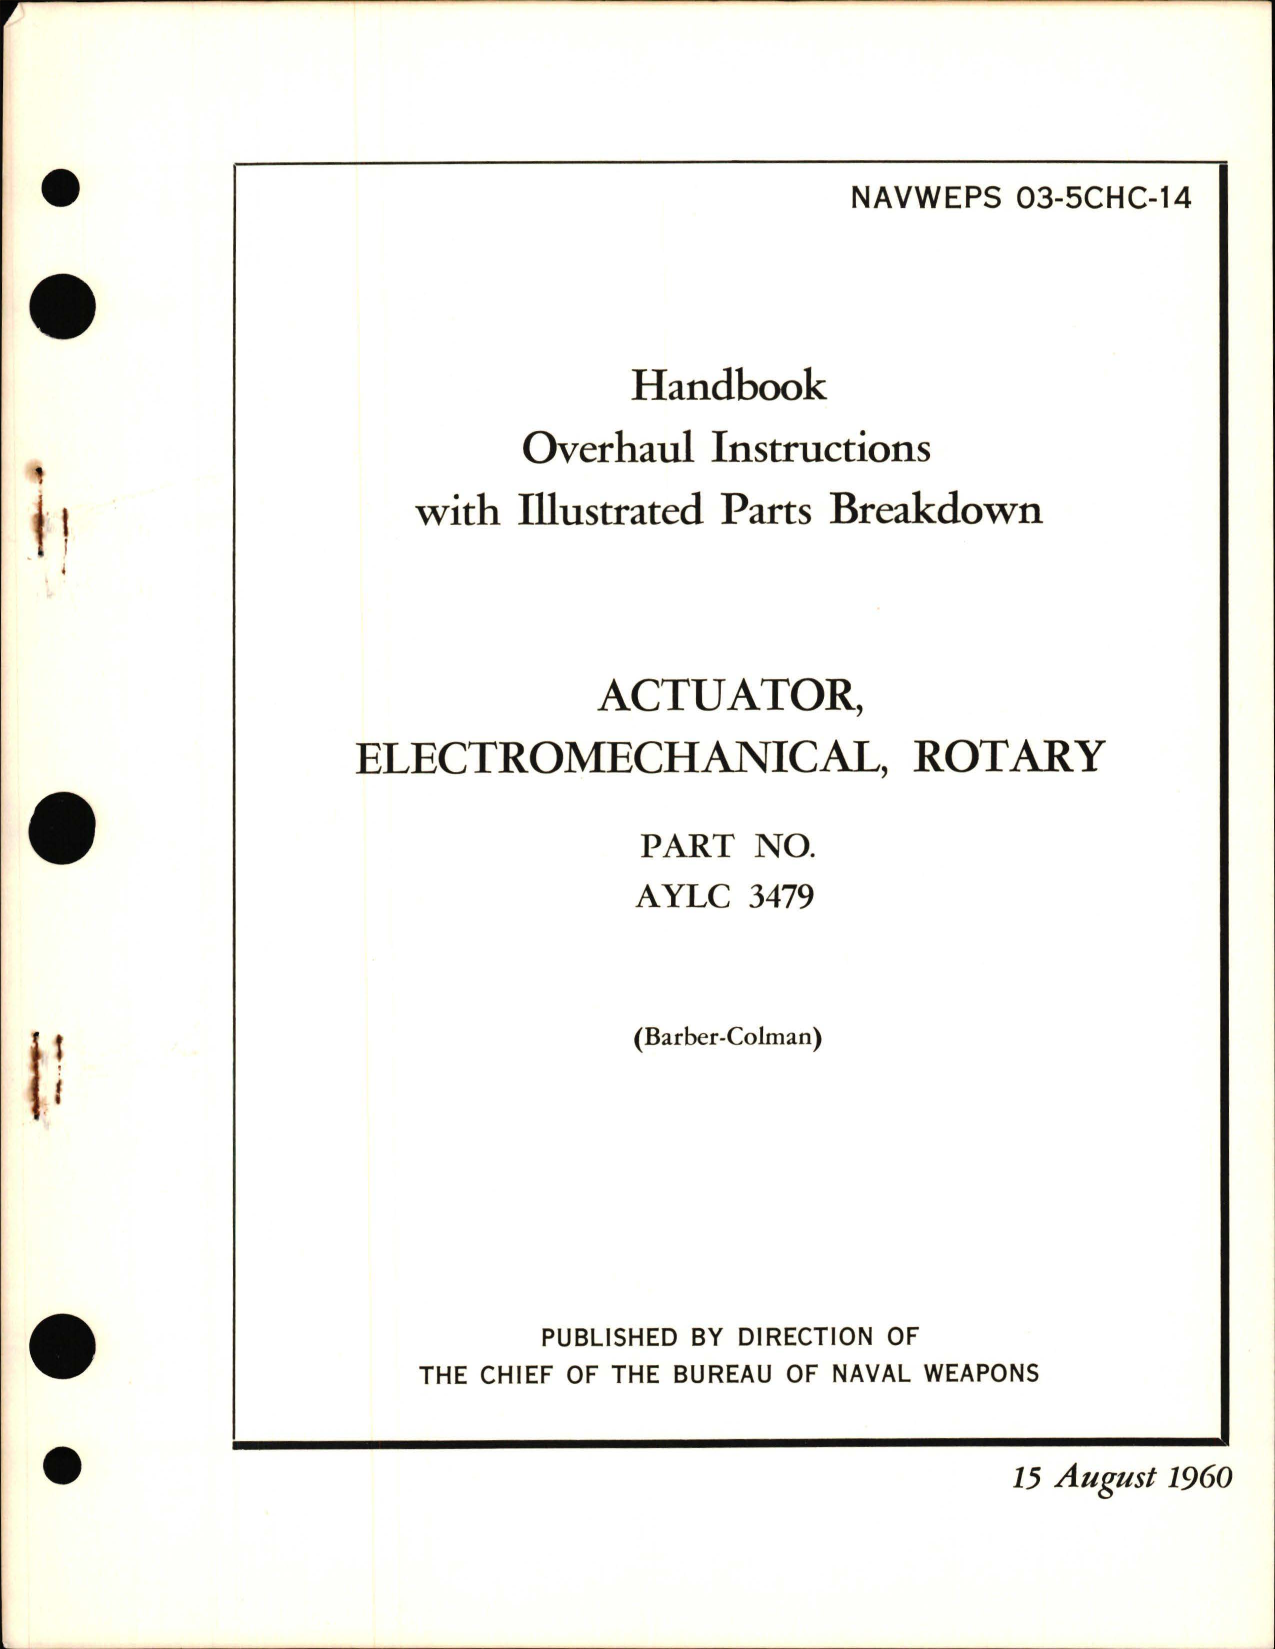 Sample page 1 from AirCorps Library document: Overhaul Instructions with Illustrated Parts Breakdown for Electromechanical Rotary Actuator - Part AYLC 3479 